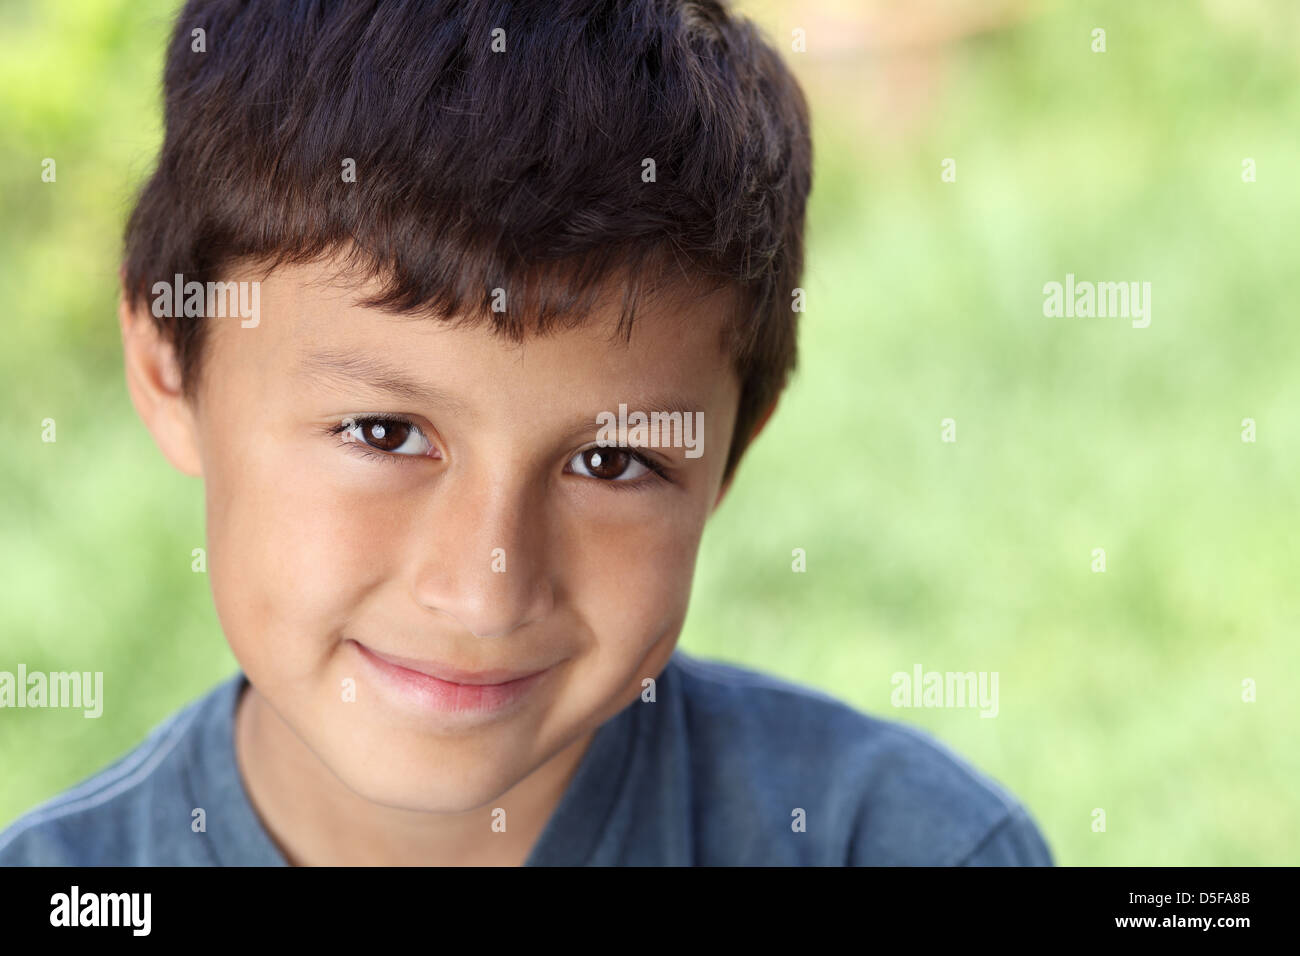 Smiling young boy outside with copy space to right Stock Photo